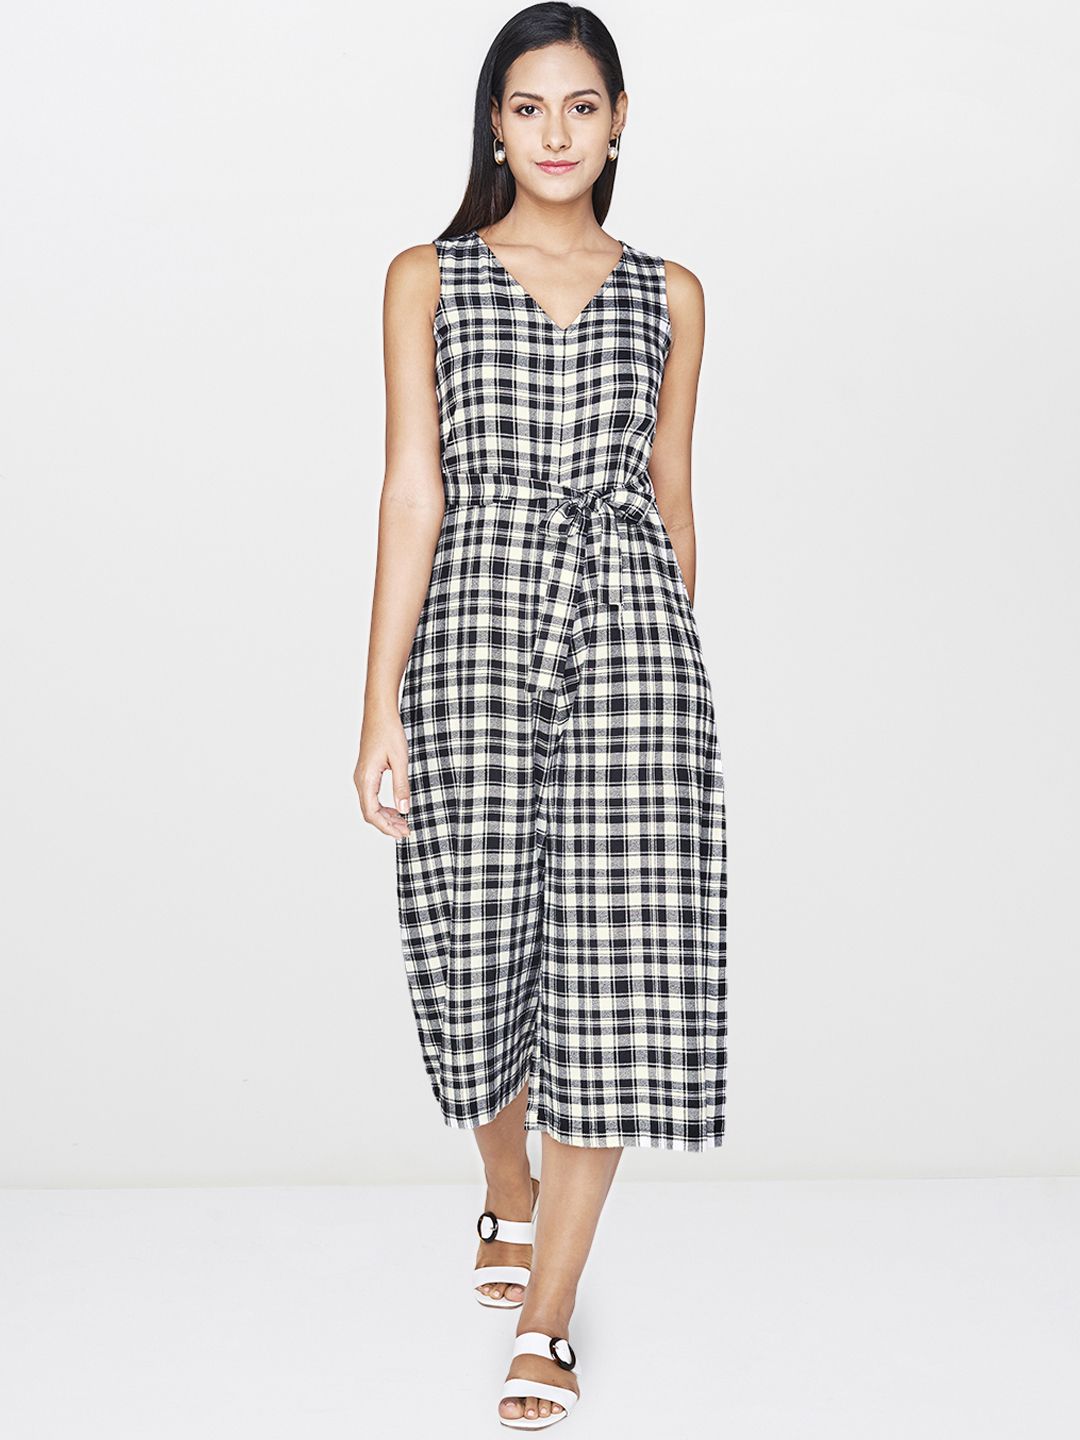 AND Women Black & White Checked Culotte Jumpsuit with Waist Tie-Up Detailing Price in India